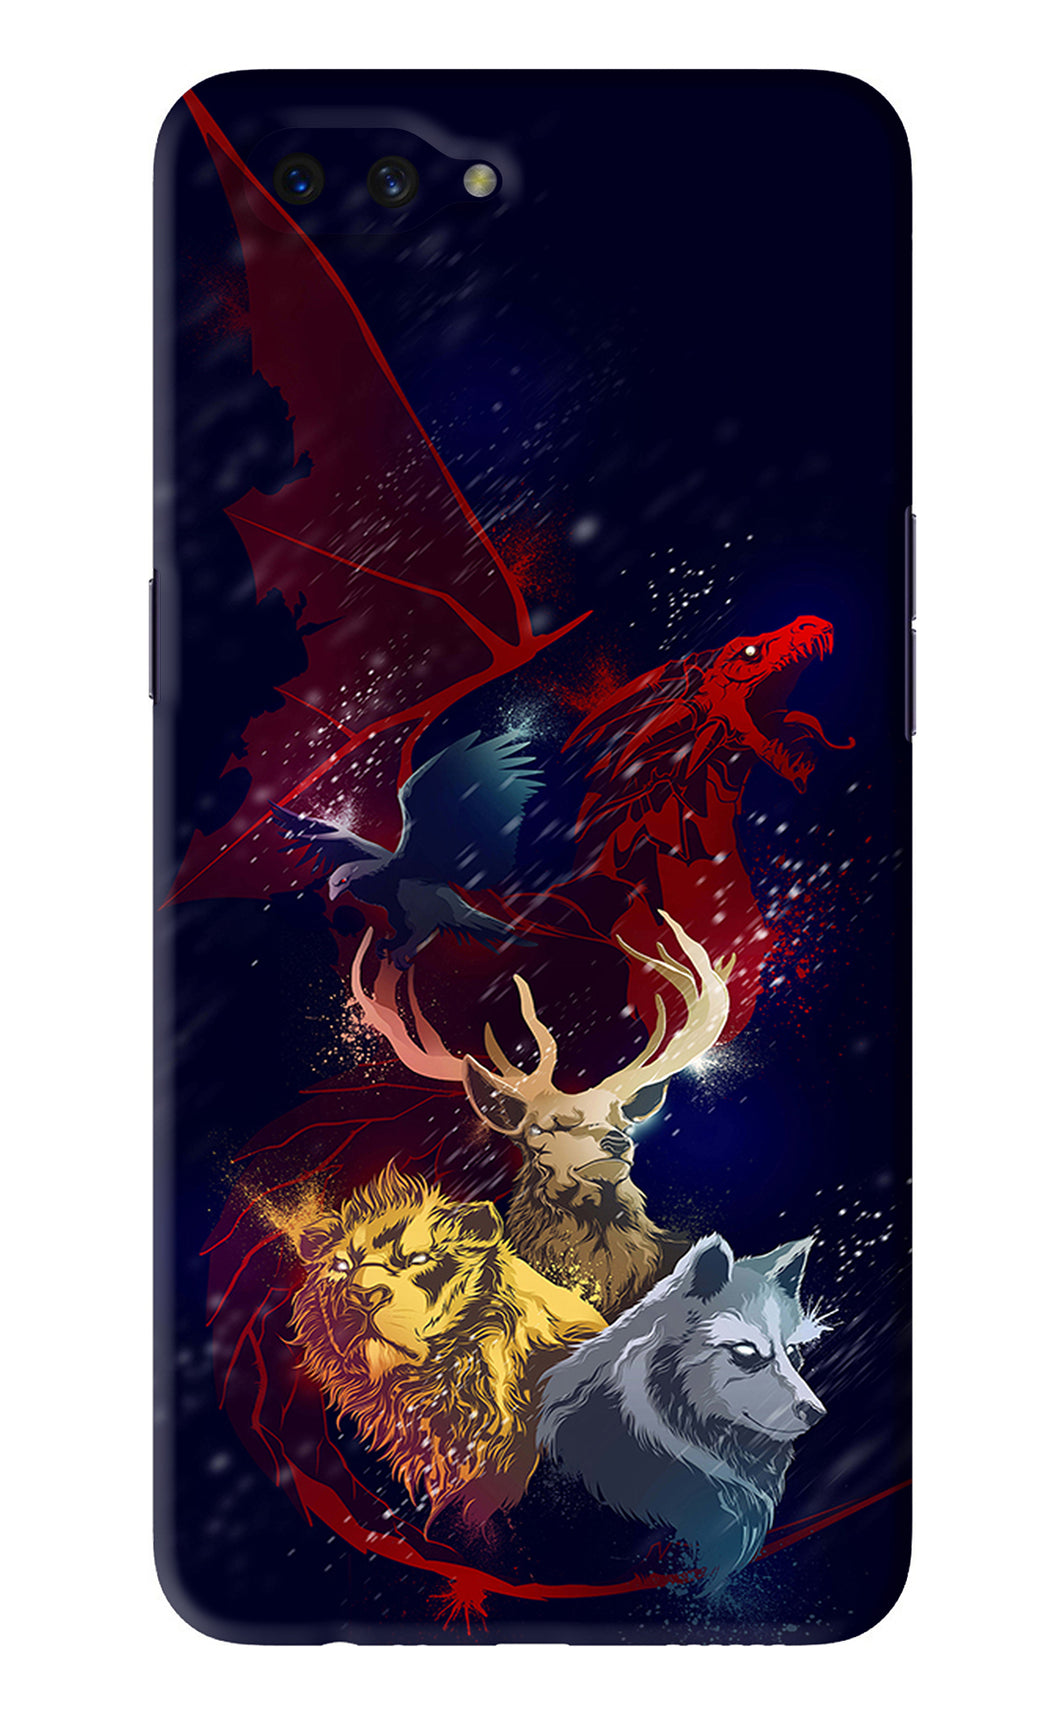 Game Of Thrones Oppo A3S Back Skin Wrap